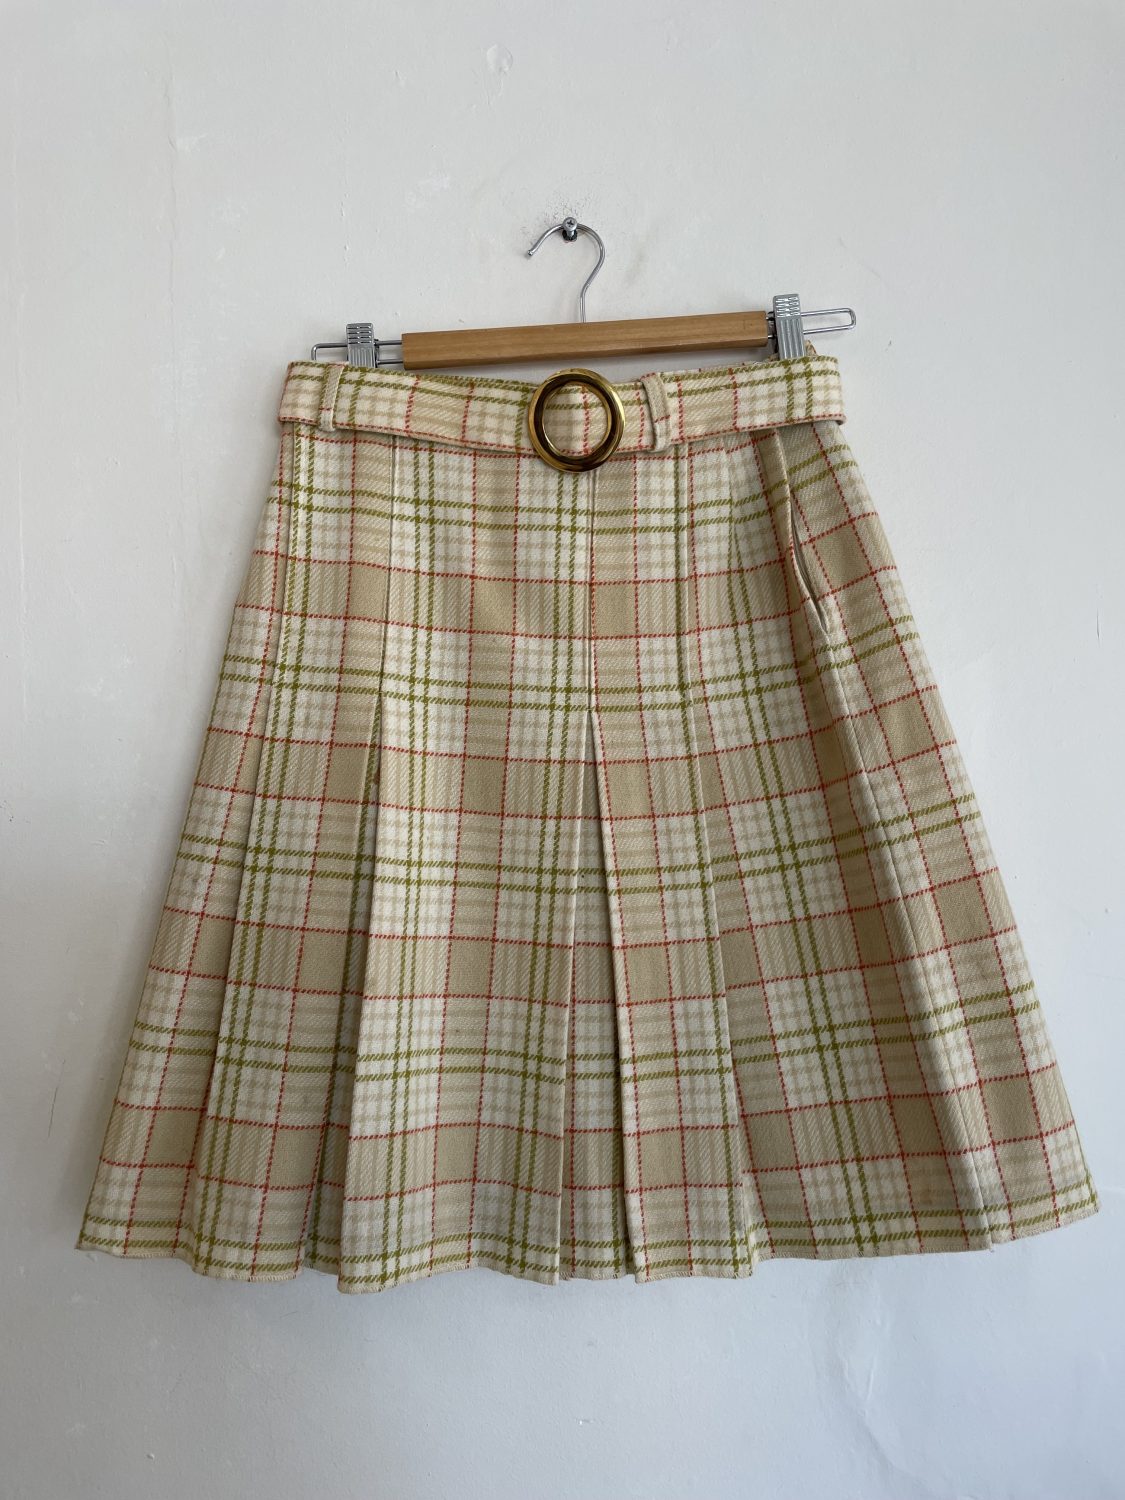 A-LINE VINTAGE WOOL CHECK SKIRT WITH A BELT | Chaos Bazaar Vintage